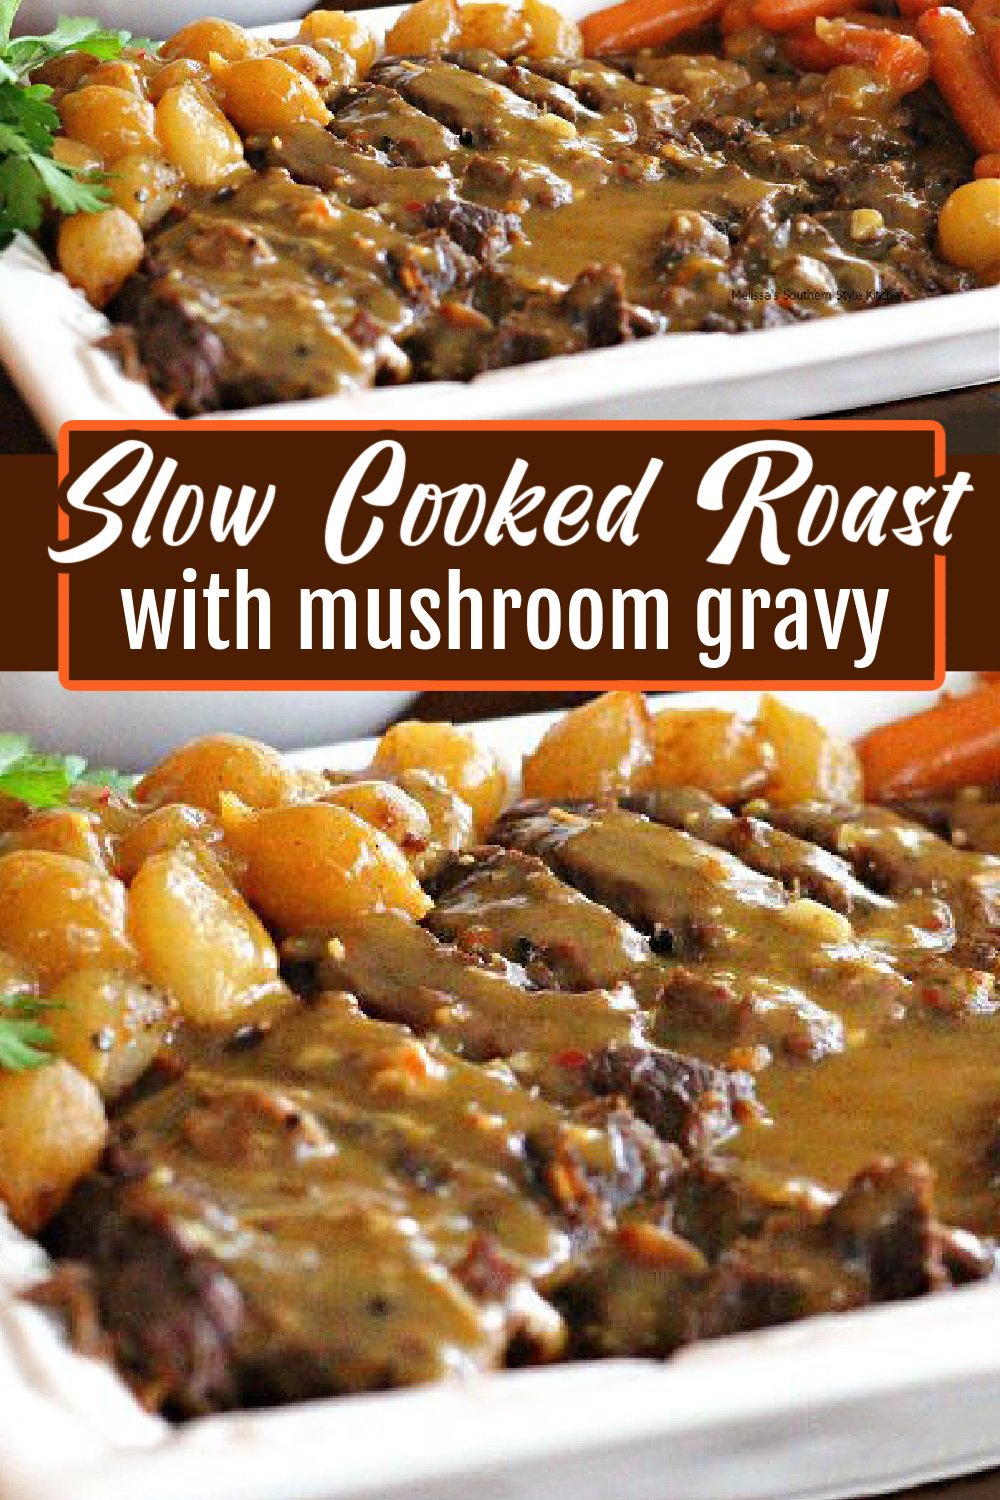 Make this tender Slow Cooked Roast with Creamy Mushroom Gravy in your crockpot #potroast #slowcookedroast #crockpotbeefrecipes #potroast #beef #dinnerideas #slowcookedroast #sundaysupper #dinner #southernfood #southernrecipes #crockpotrecipes via @melissasssk